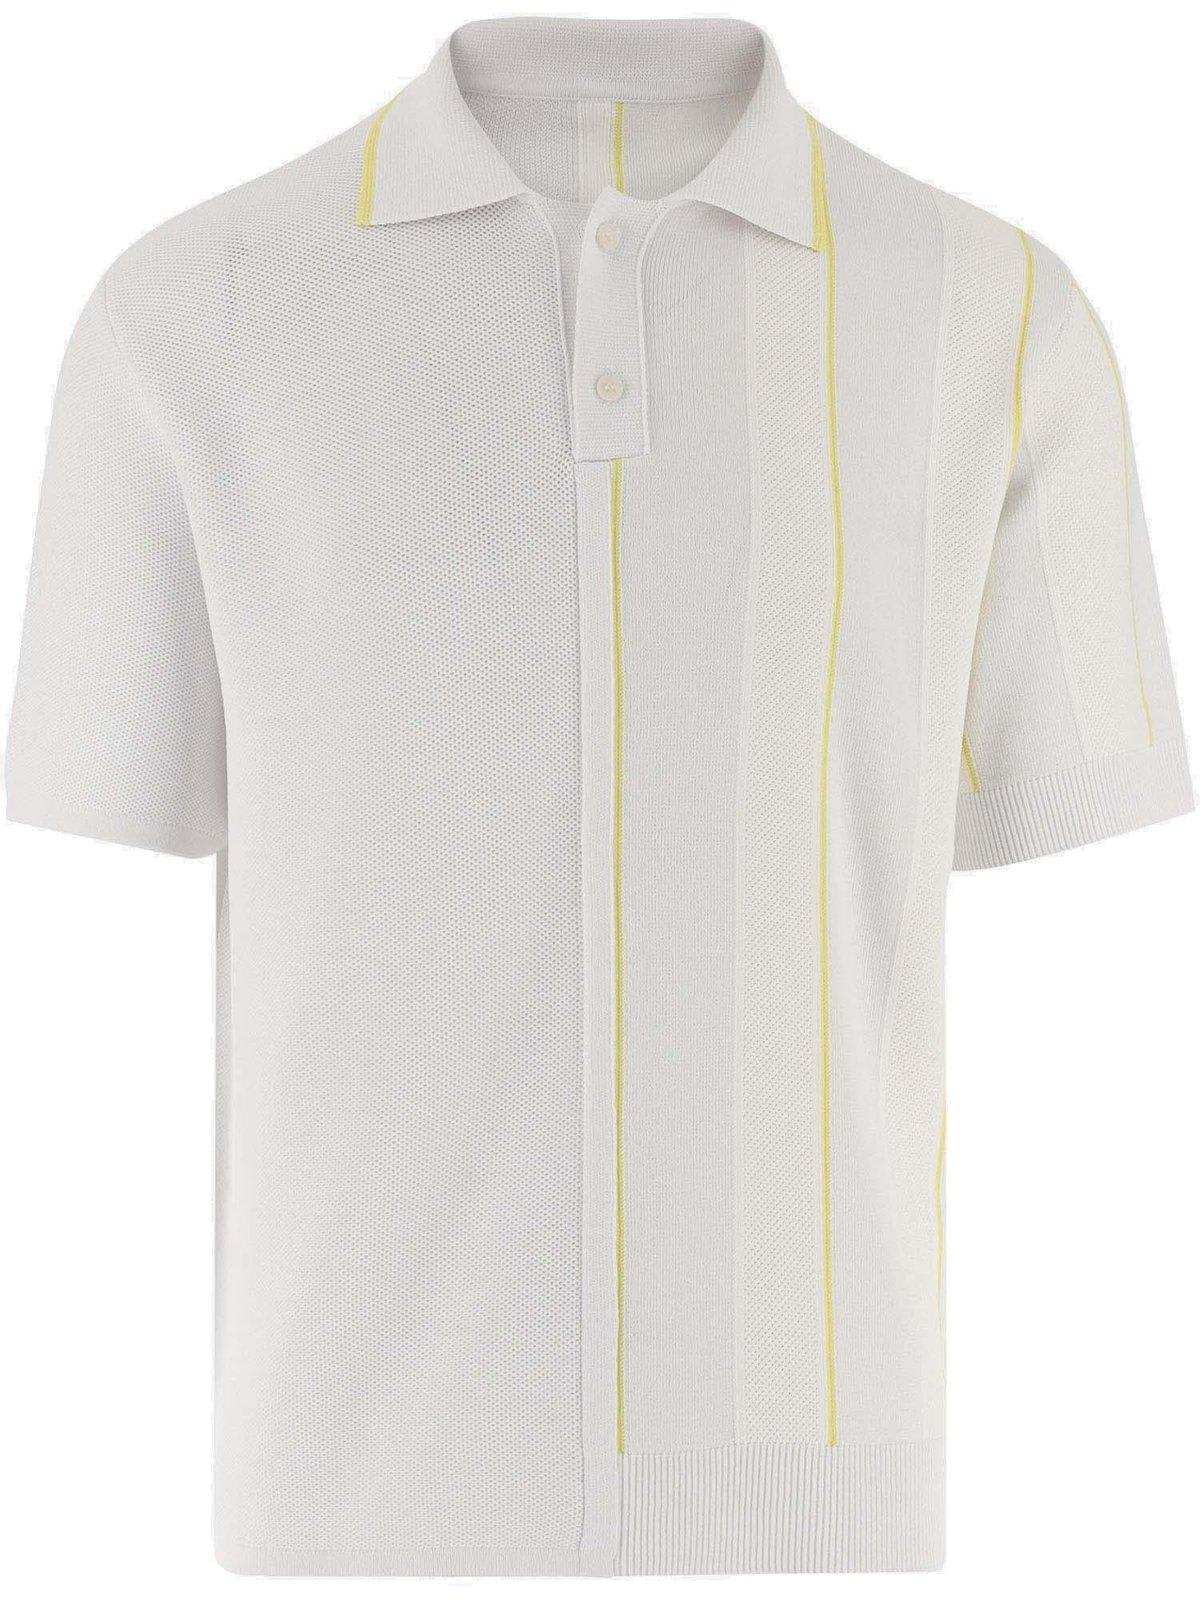 JACQUEMUS CONTRAST KNITTED POLO SHIRT